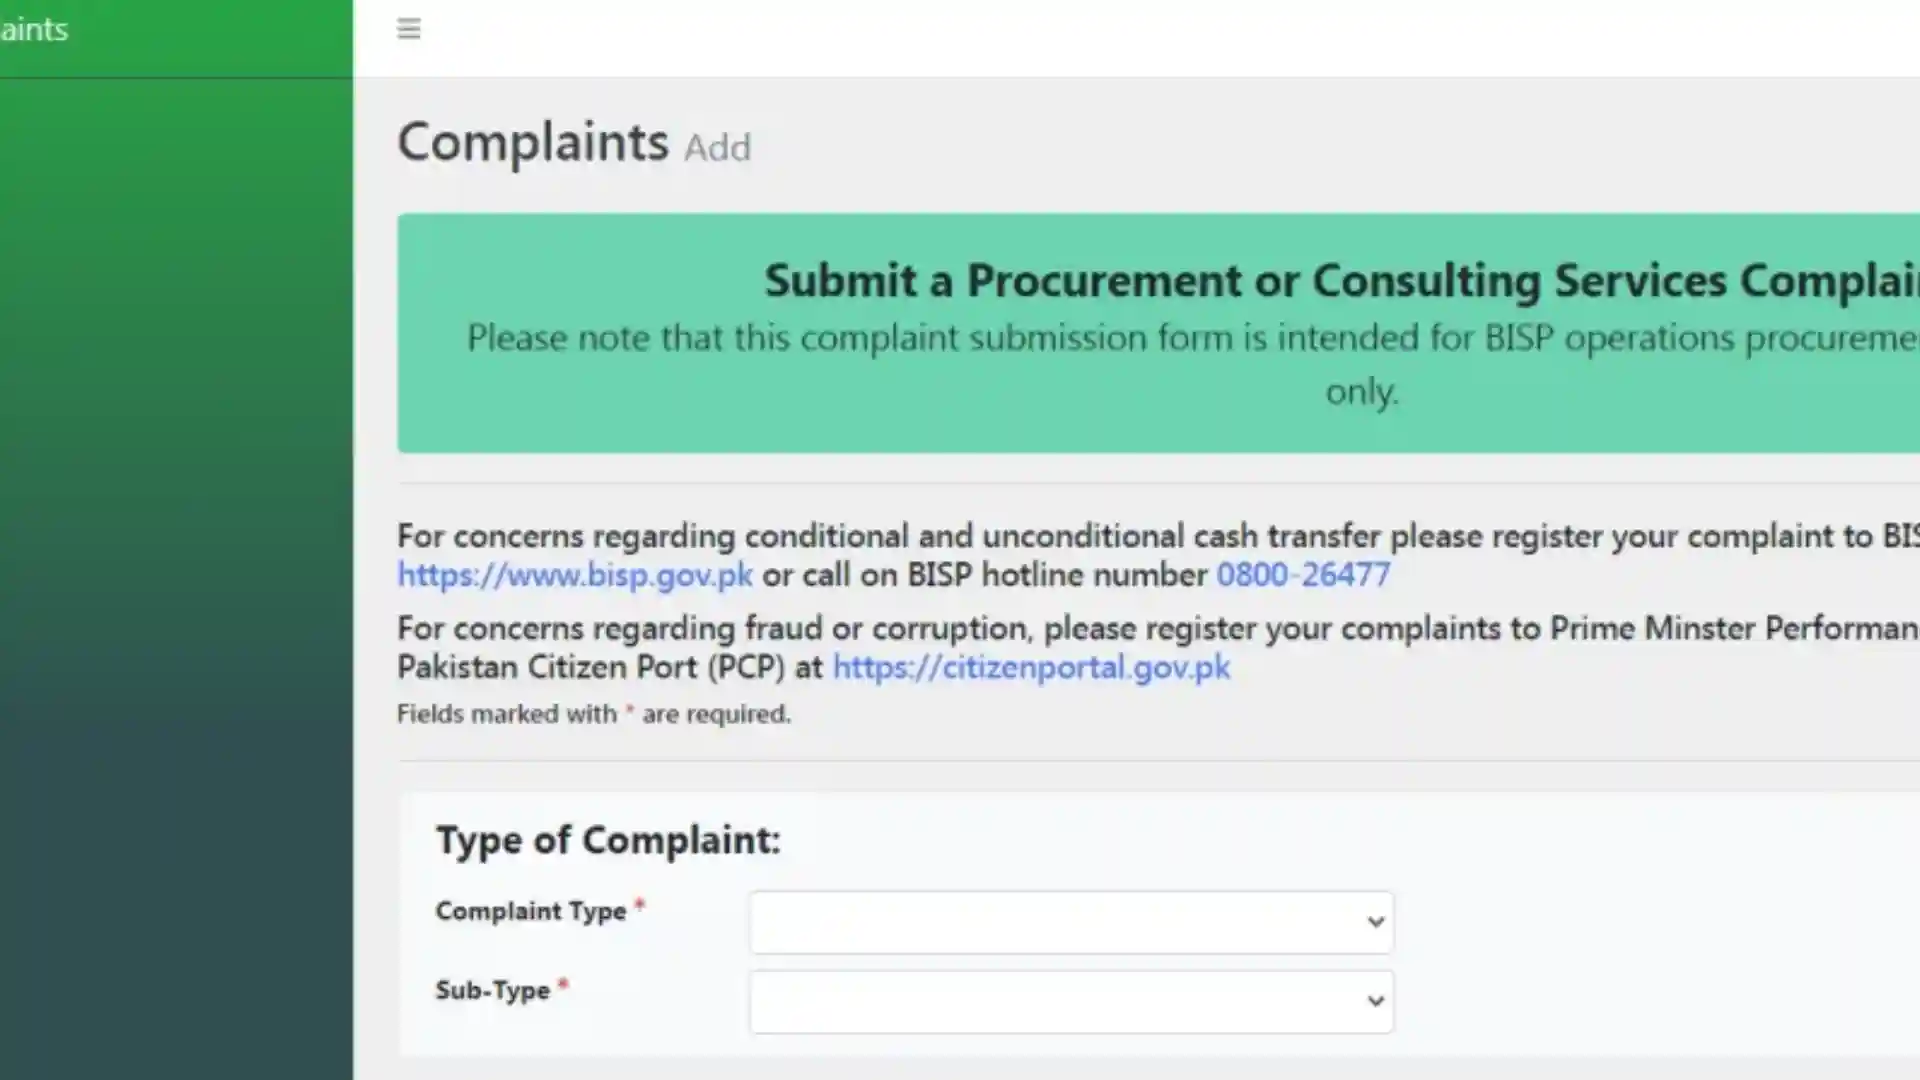 How to Register a Complaint in BISP